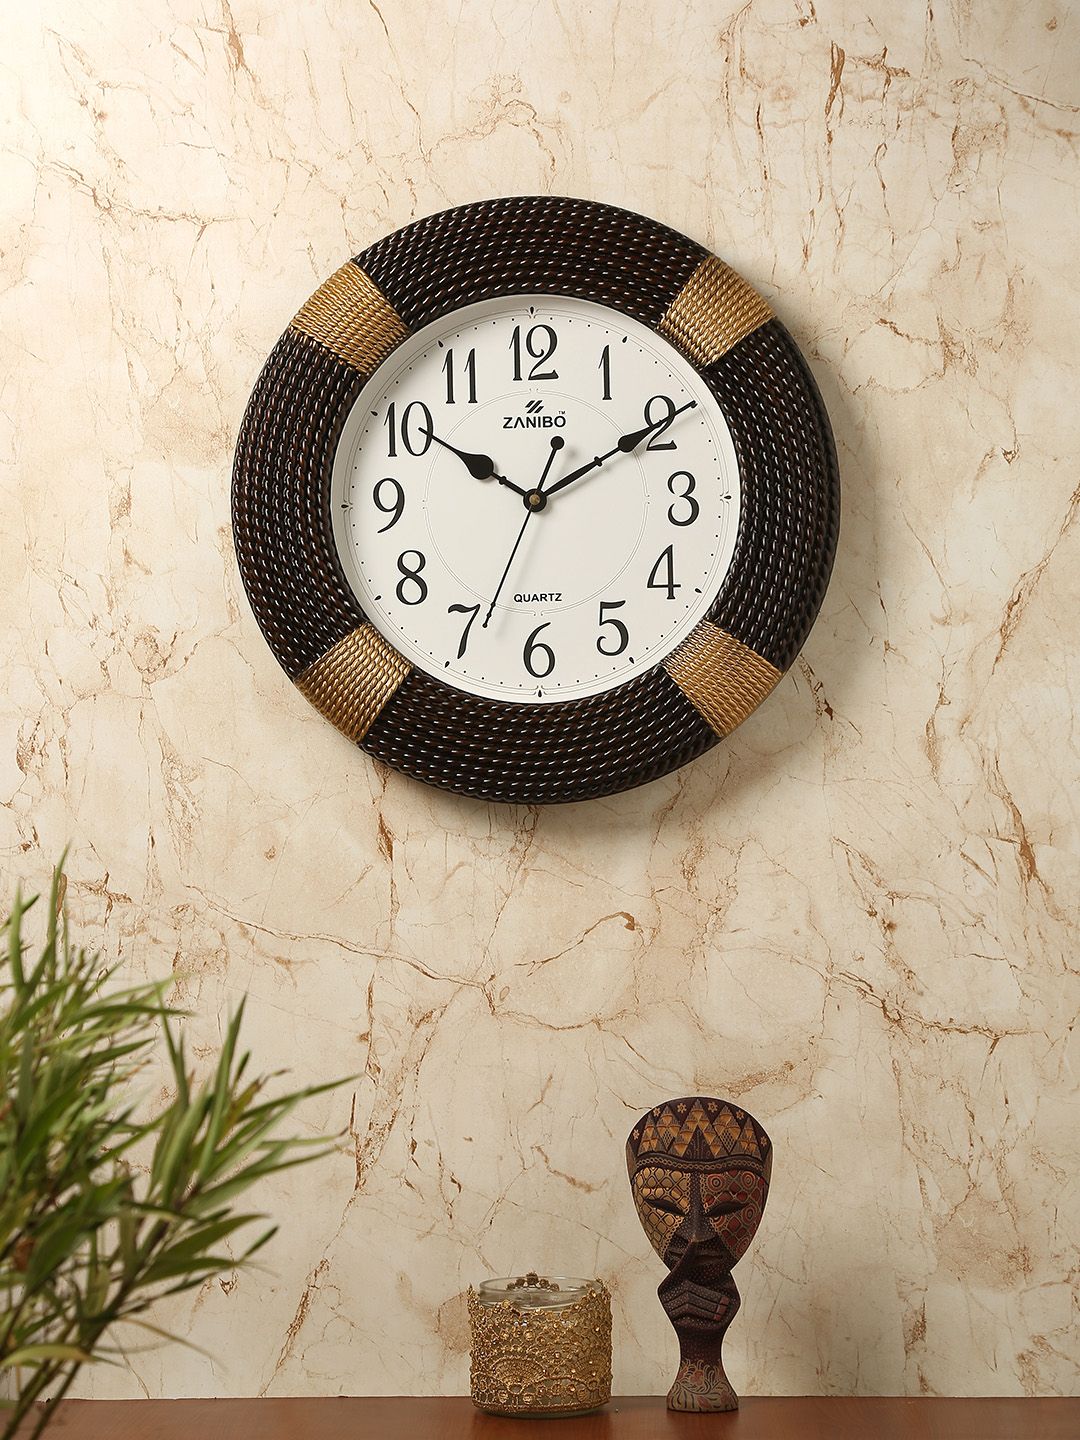 ZANIBO White & Brown Round Solid Analogue Wall Clock Price in India